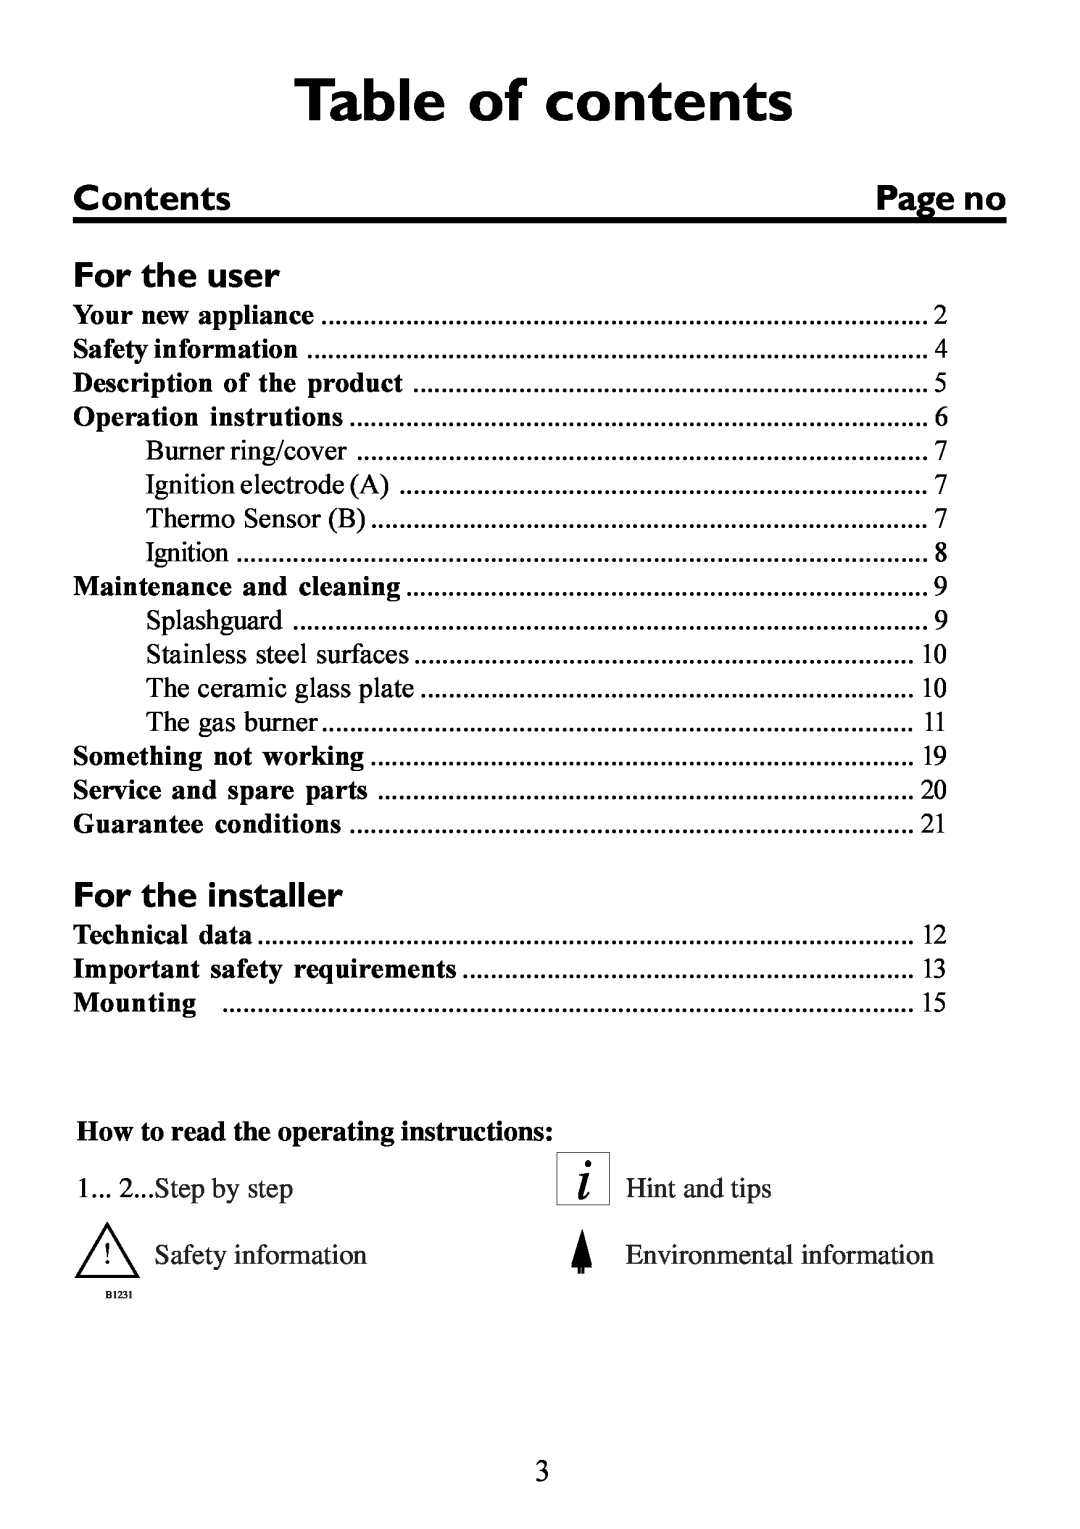 Electrolux Gas hob Table of contents, How to read the operating instructions, Contents, For the user, For the installer 